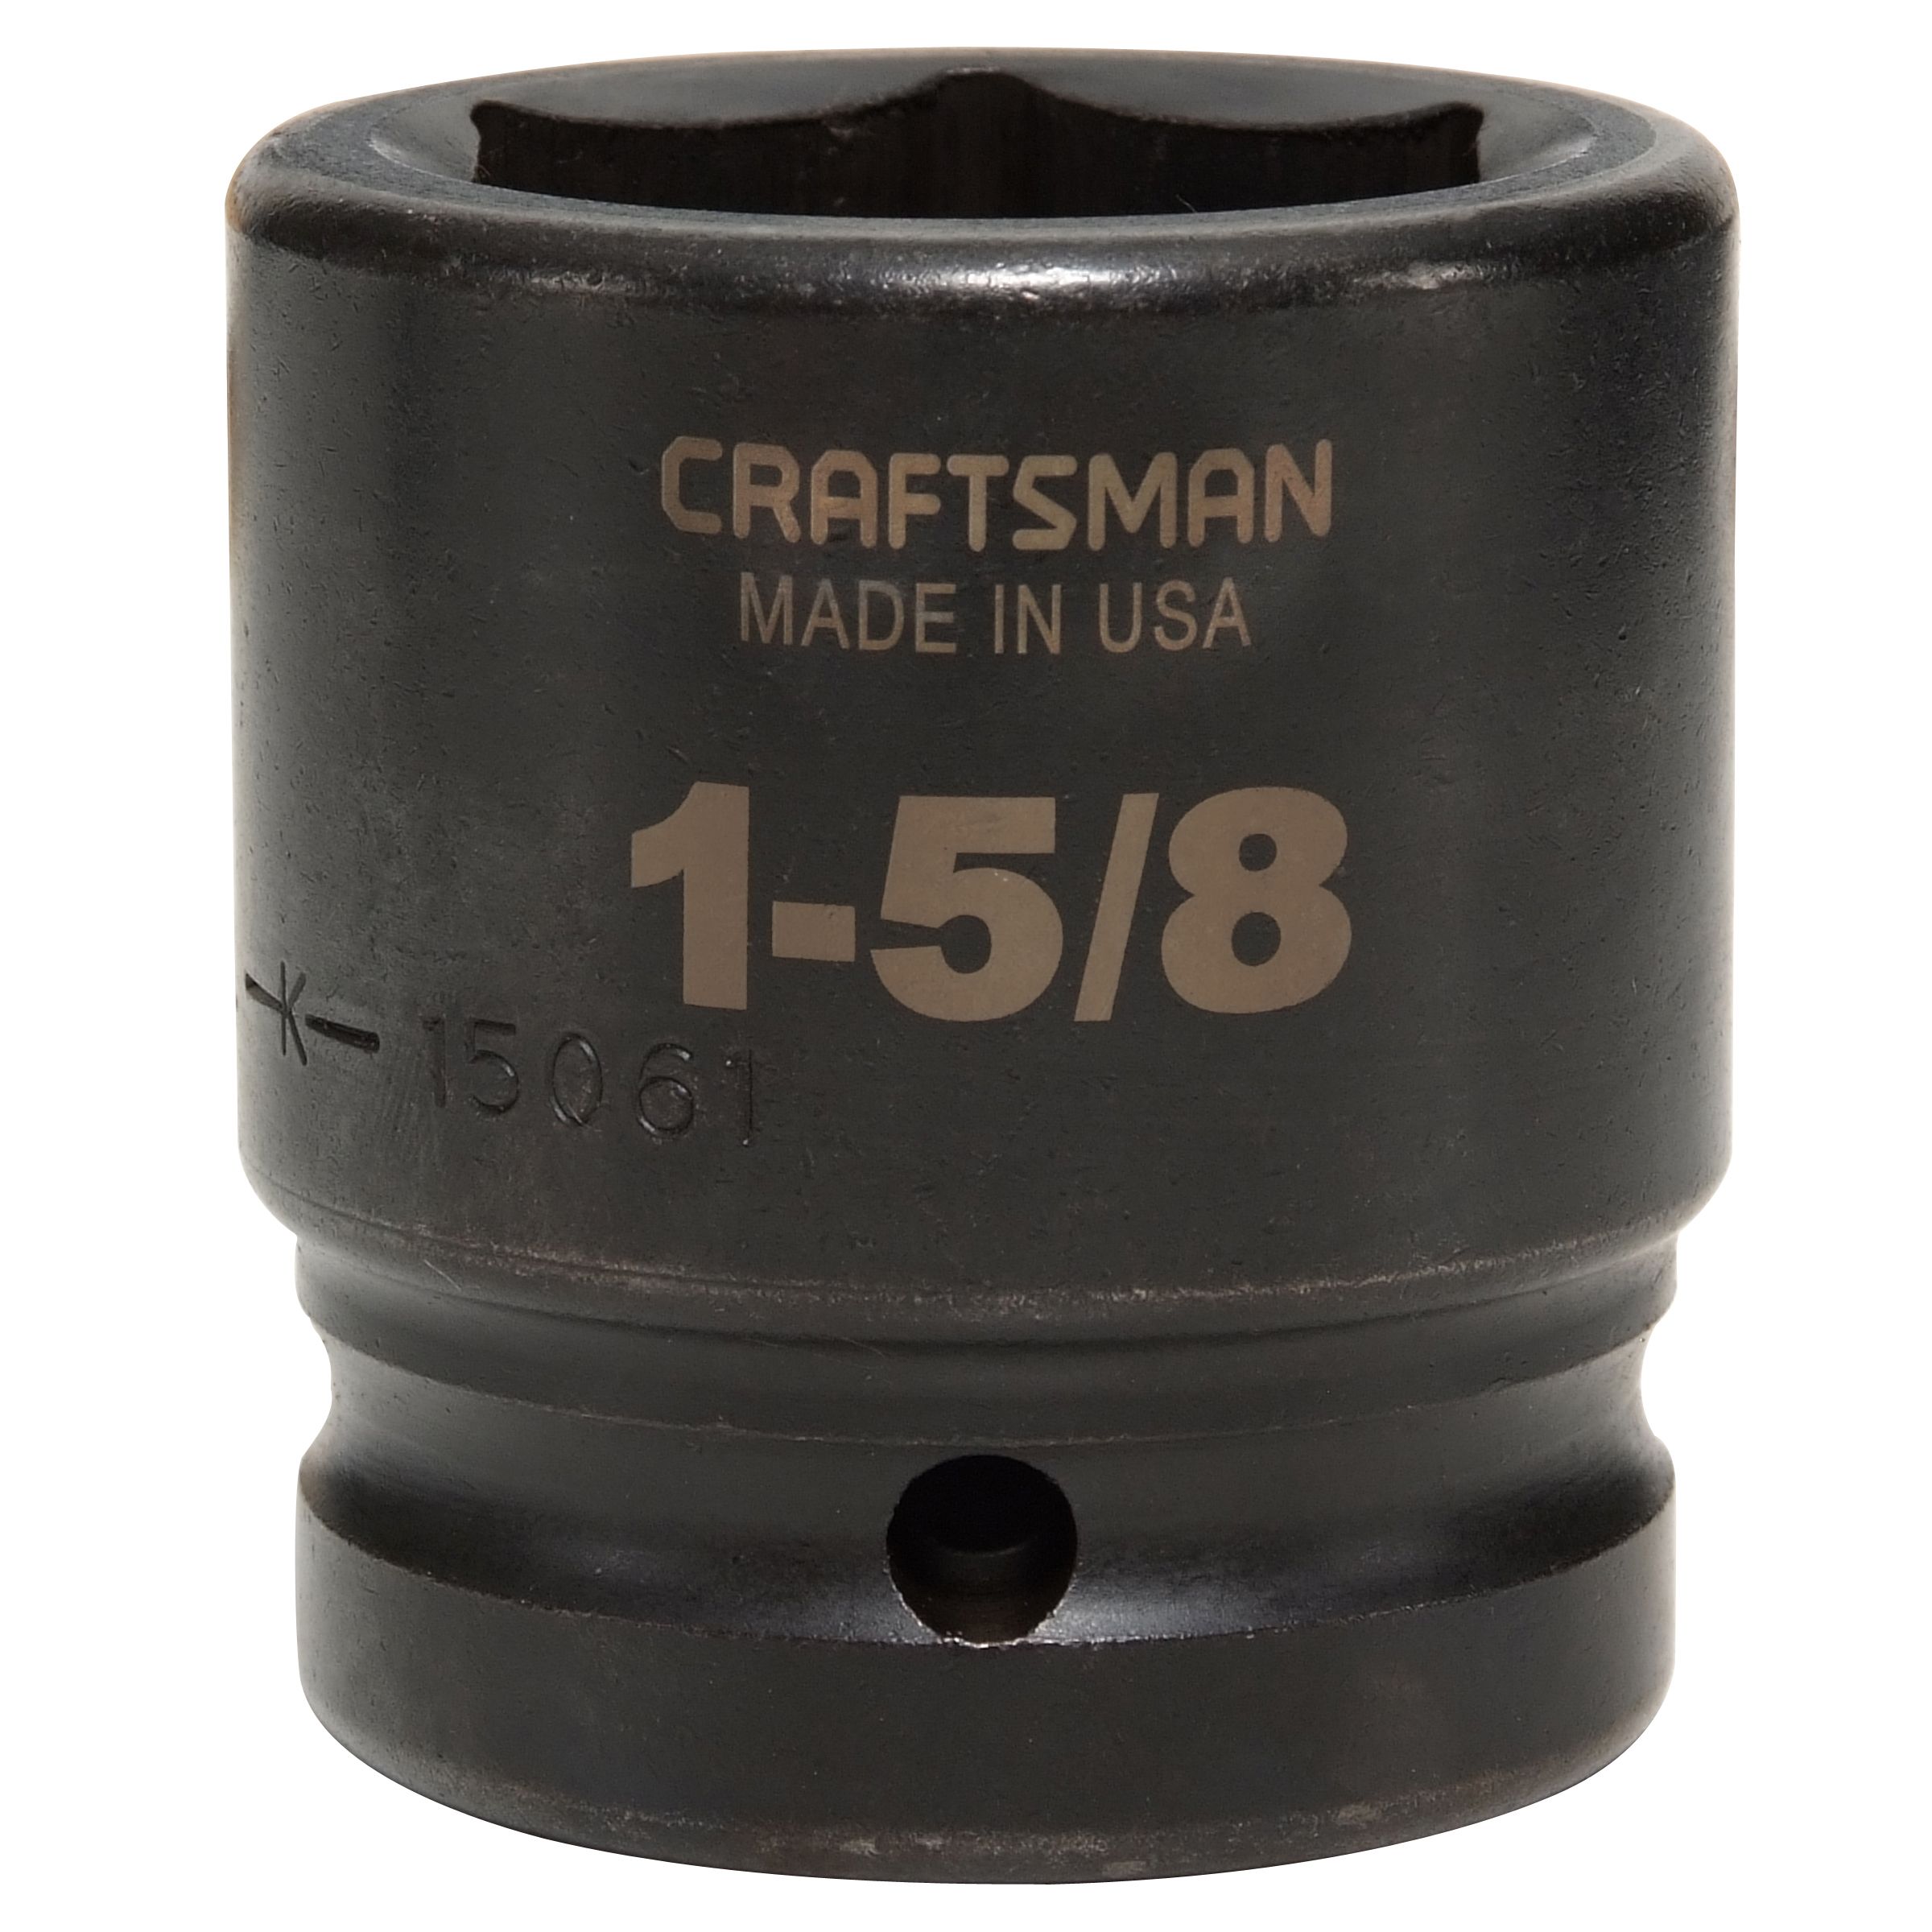 Craftsman 1-5/8 in. Easy-To-Read Impact Socket, 6 pt. Standard 1 in. Drive